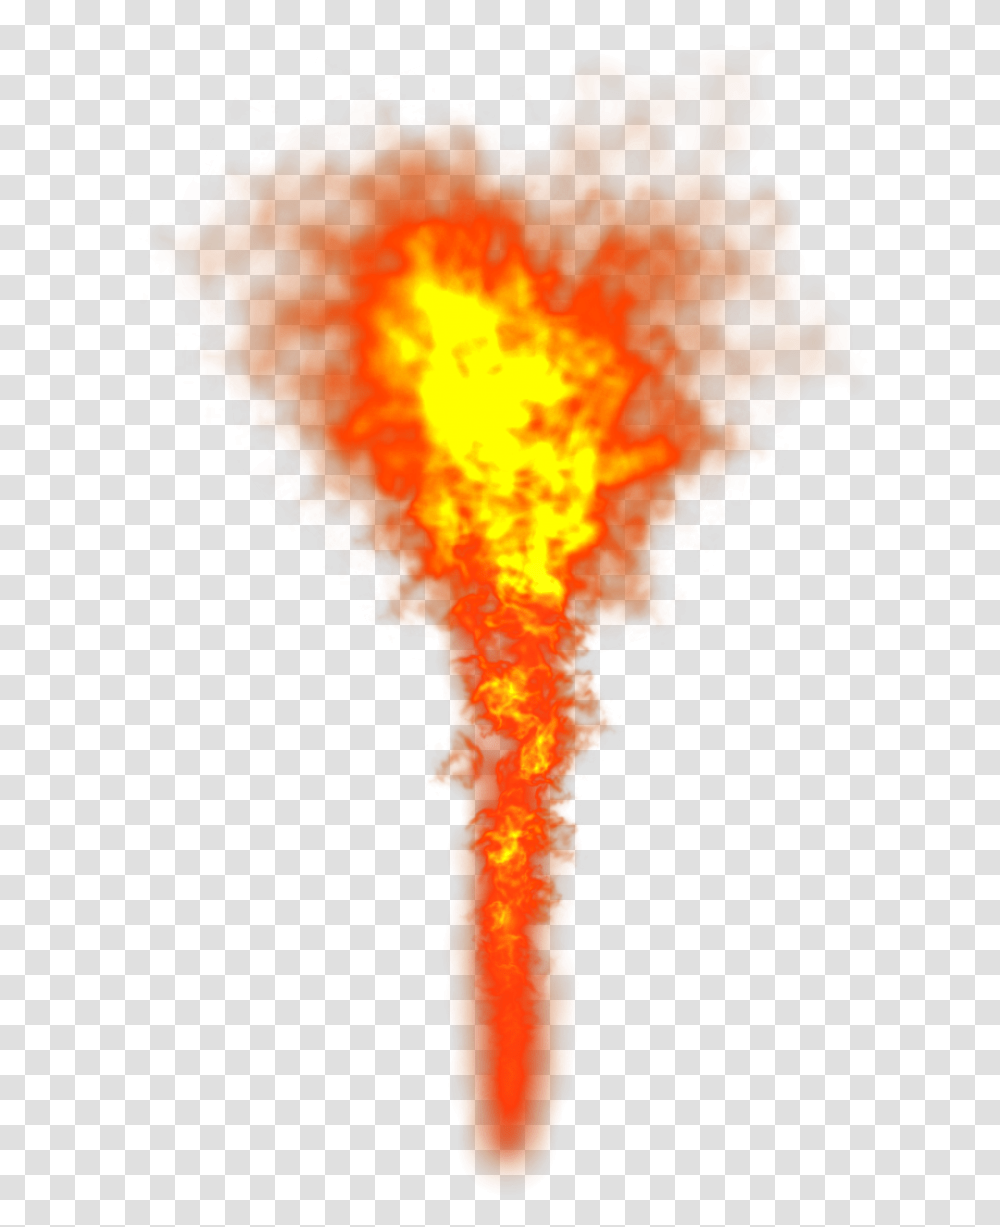 Fire Image For Free Download Dragon Fire, Bonfire, Flame, Flare, Light Transparent Png